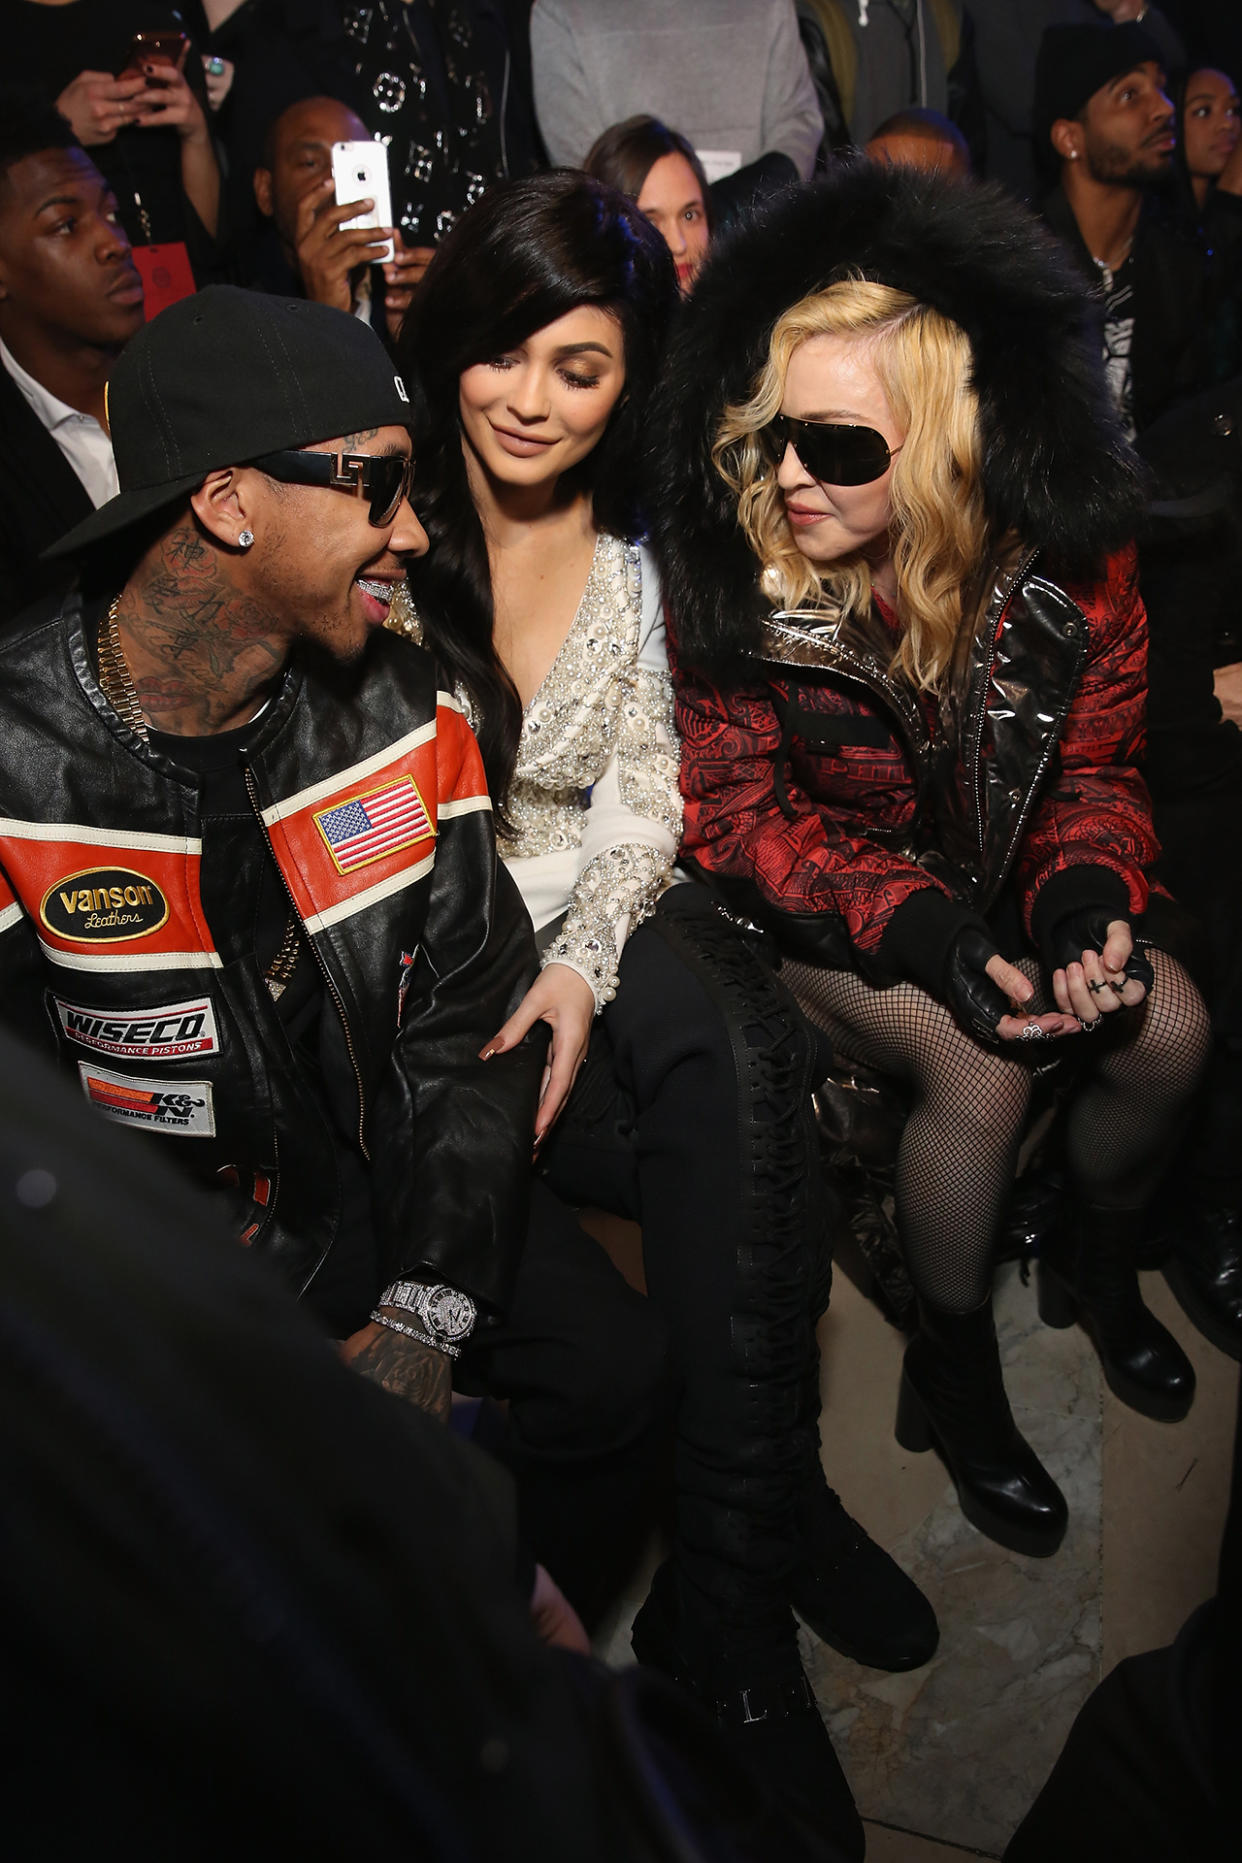 NEW YORK, NY - FEBRUARY 13: Tyga, Kylie Jenner, and Madonna attend the Philipp Plein collection during, New York Fashion Week: The Shows at New York Public Library on February 13, 2017 in New York City.  (Photo by Monica Schipper/Getty Images for New York Fashion Week: The Shows)